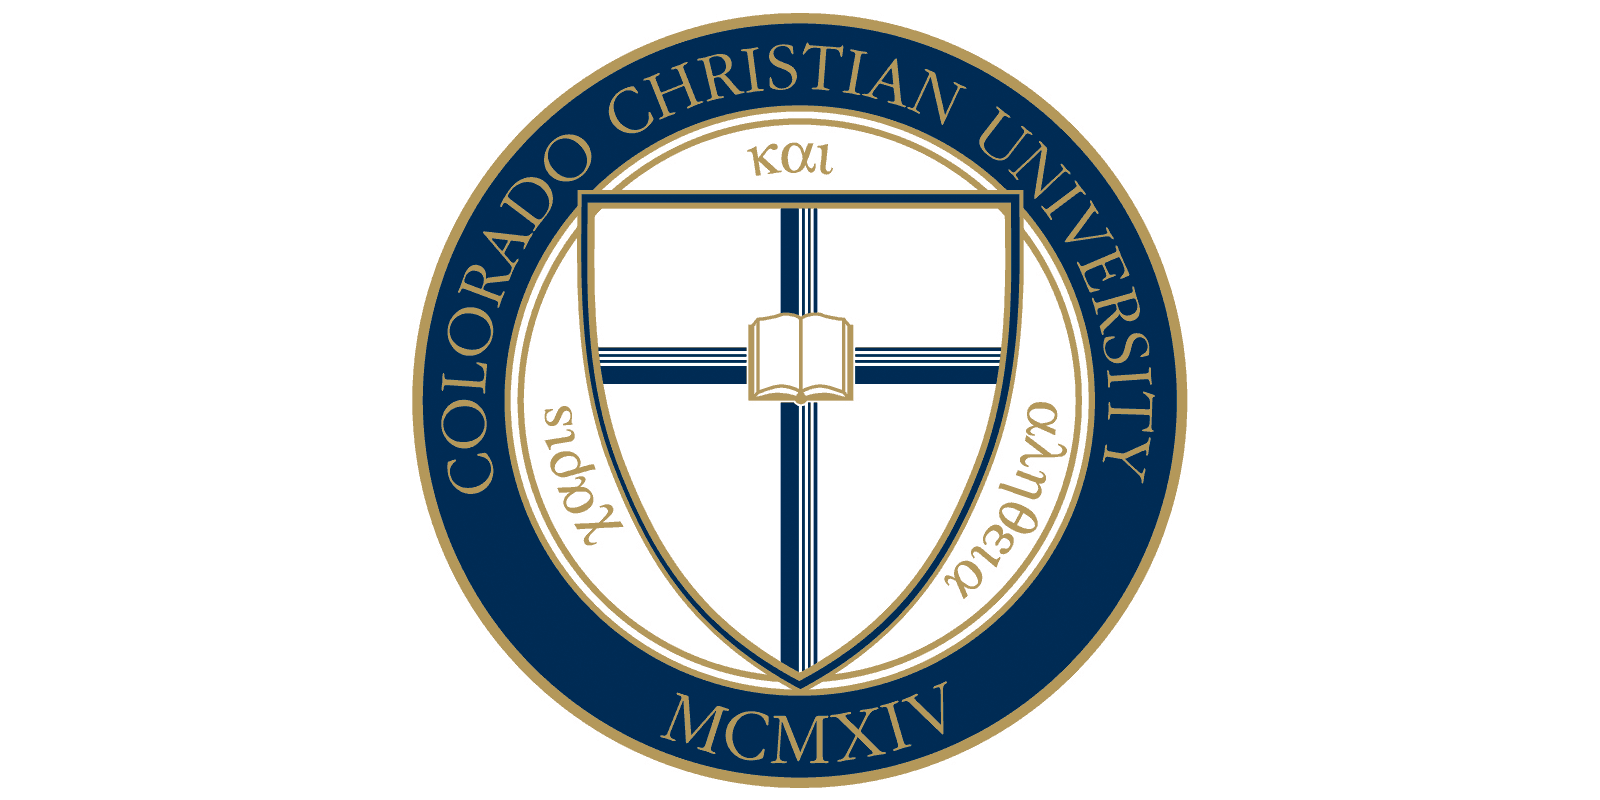 The Colorado Christian University crest, which is made up of the words "Colorado Christian University" and the year 1914 encircling a shield with the cross and Bible in the center of it. The Greek words "Grace and Truth" are also encircled.